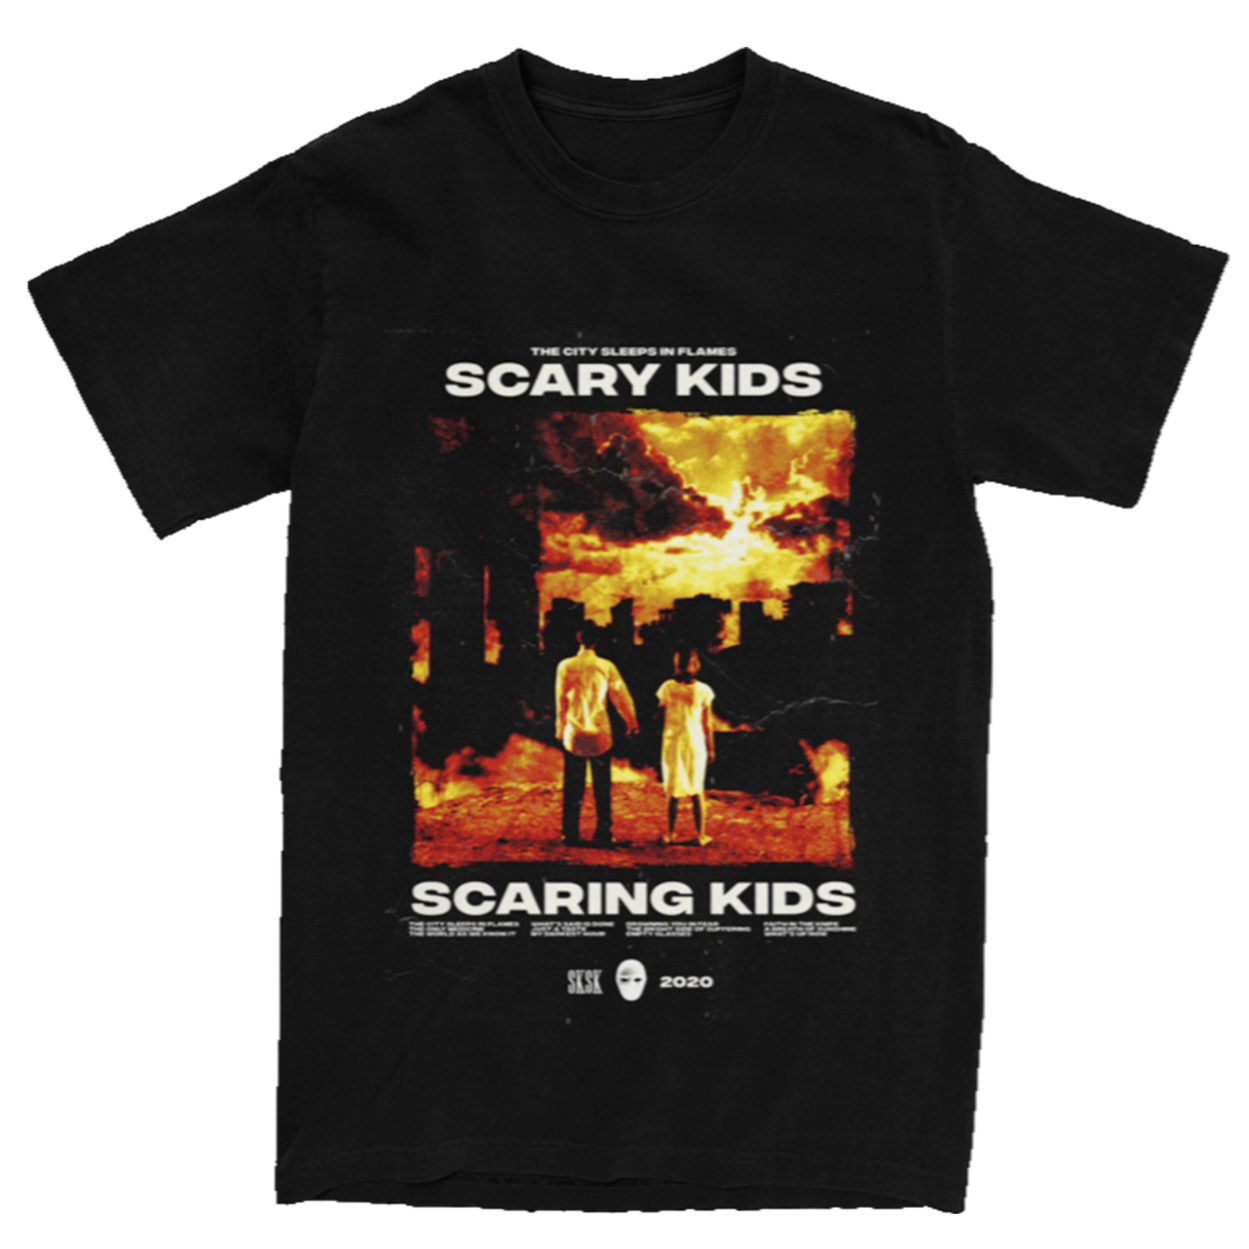 Scary Kids Scaring Kids Album Cover Tshirt